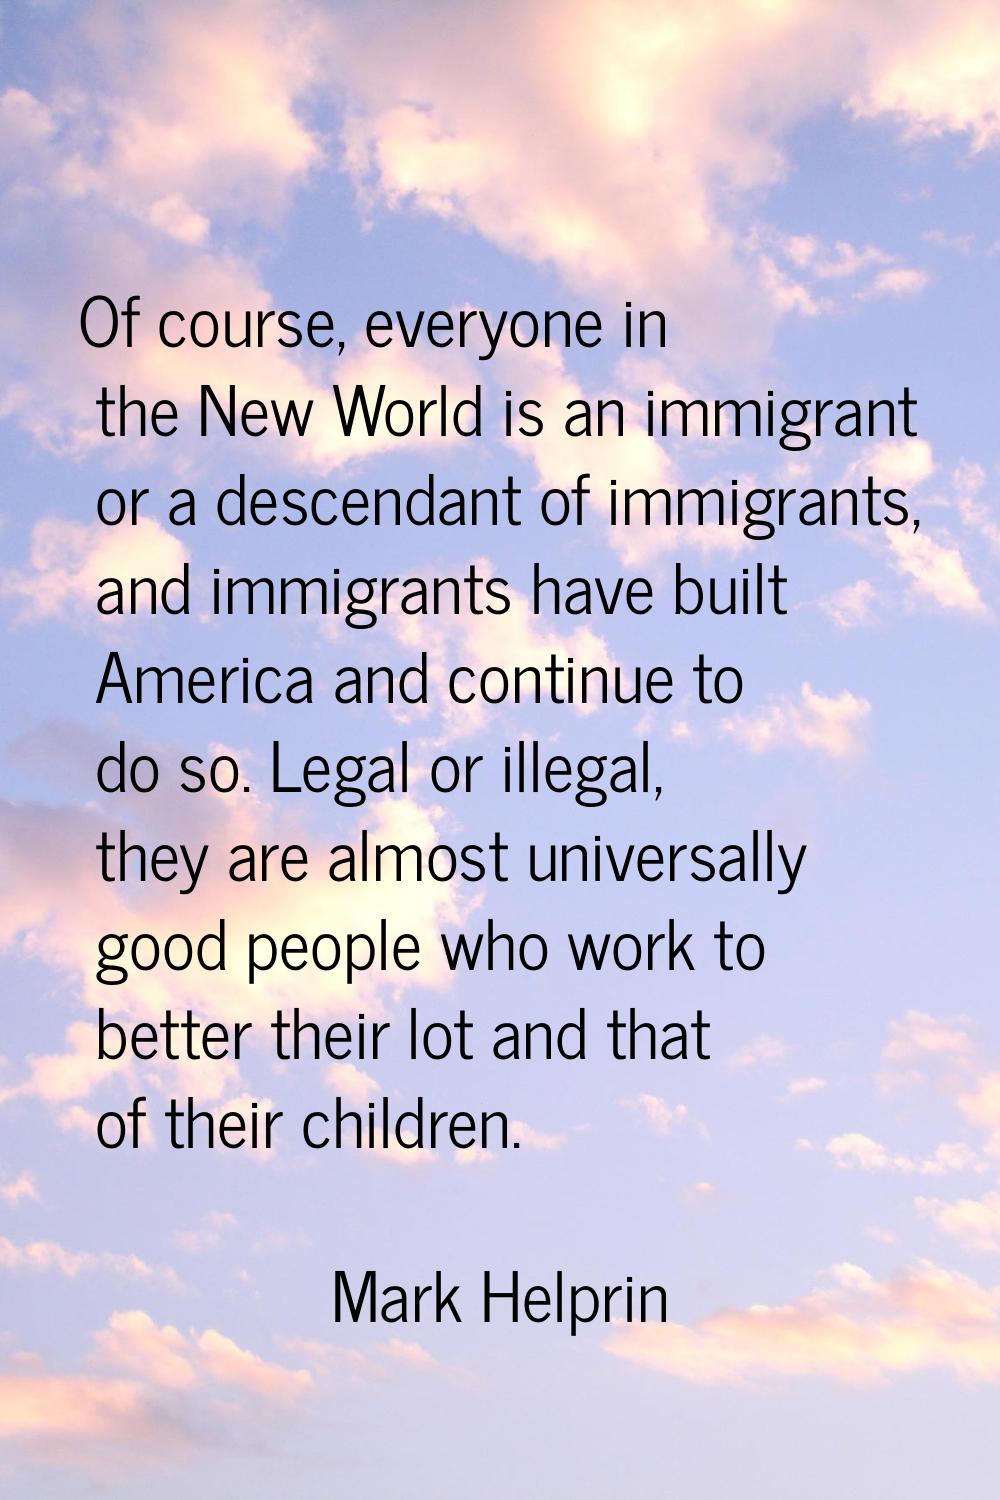 Of course, everyone in the New World is an immigrant or a descendant of immigrants, and immigrants 